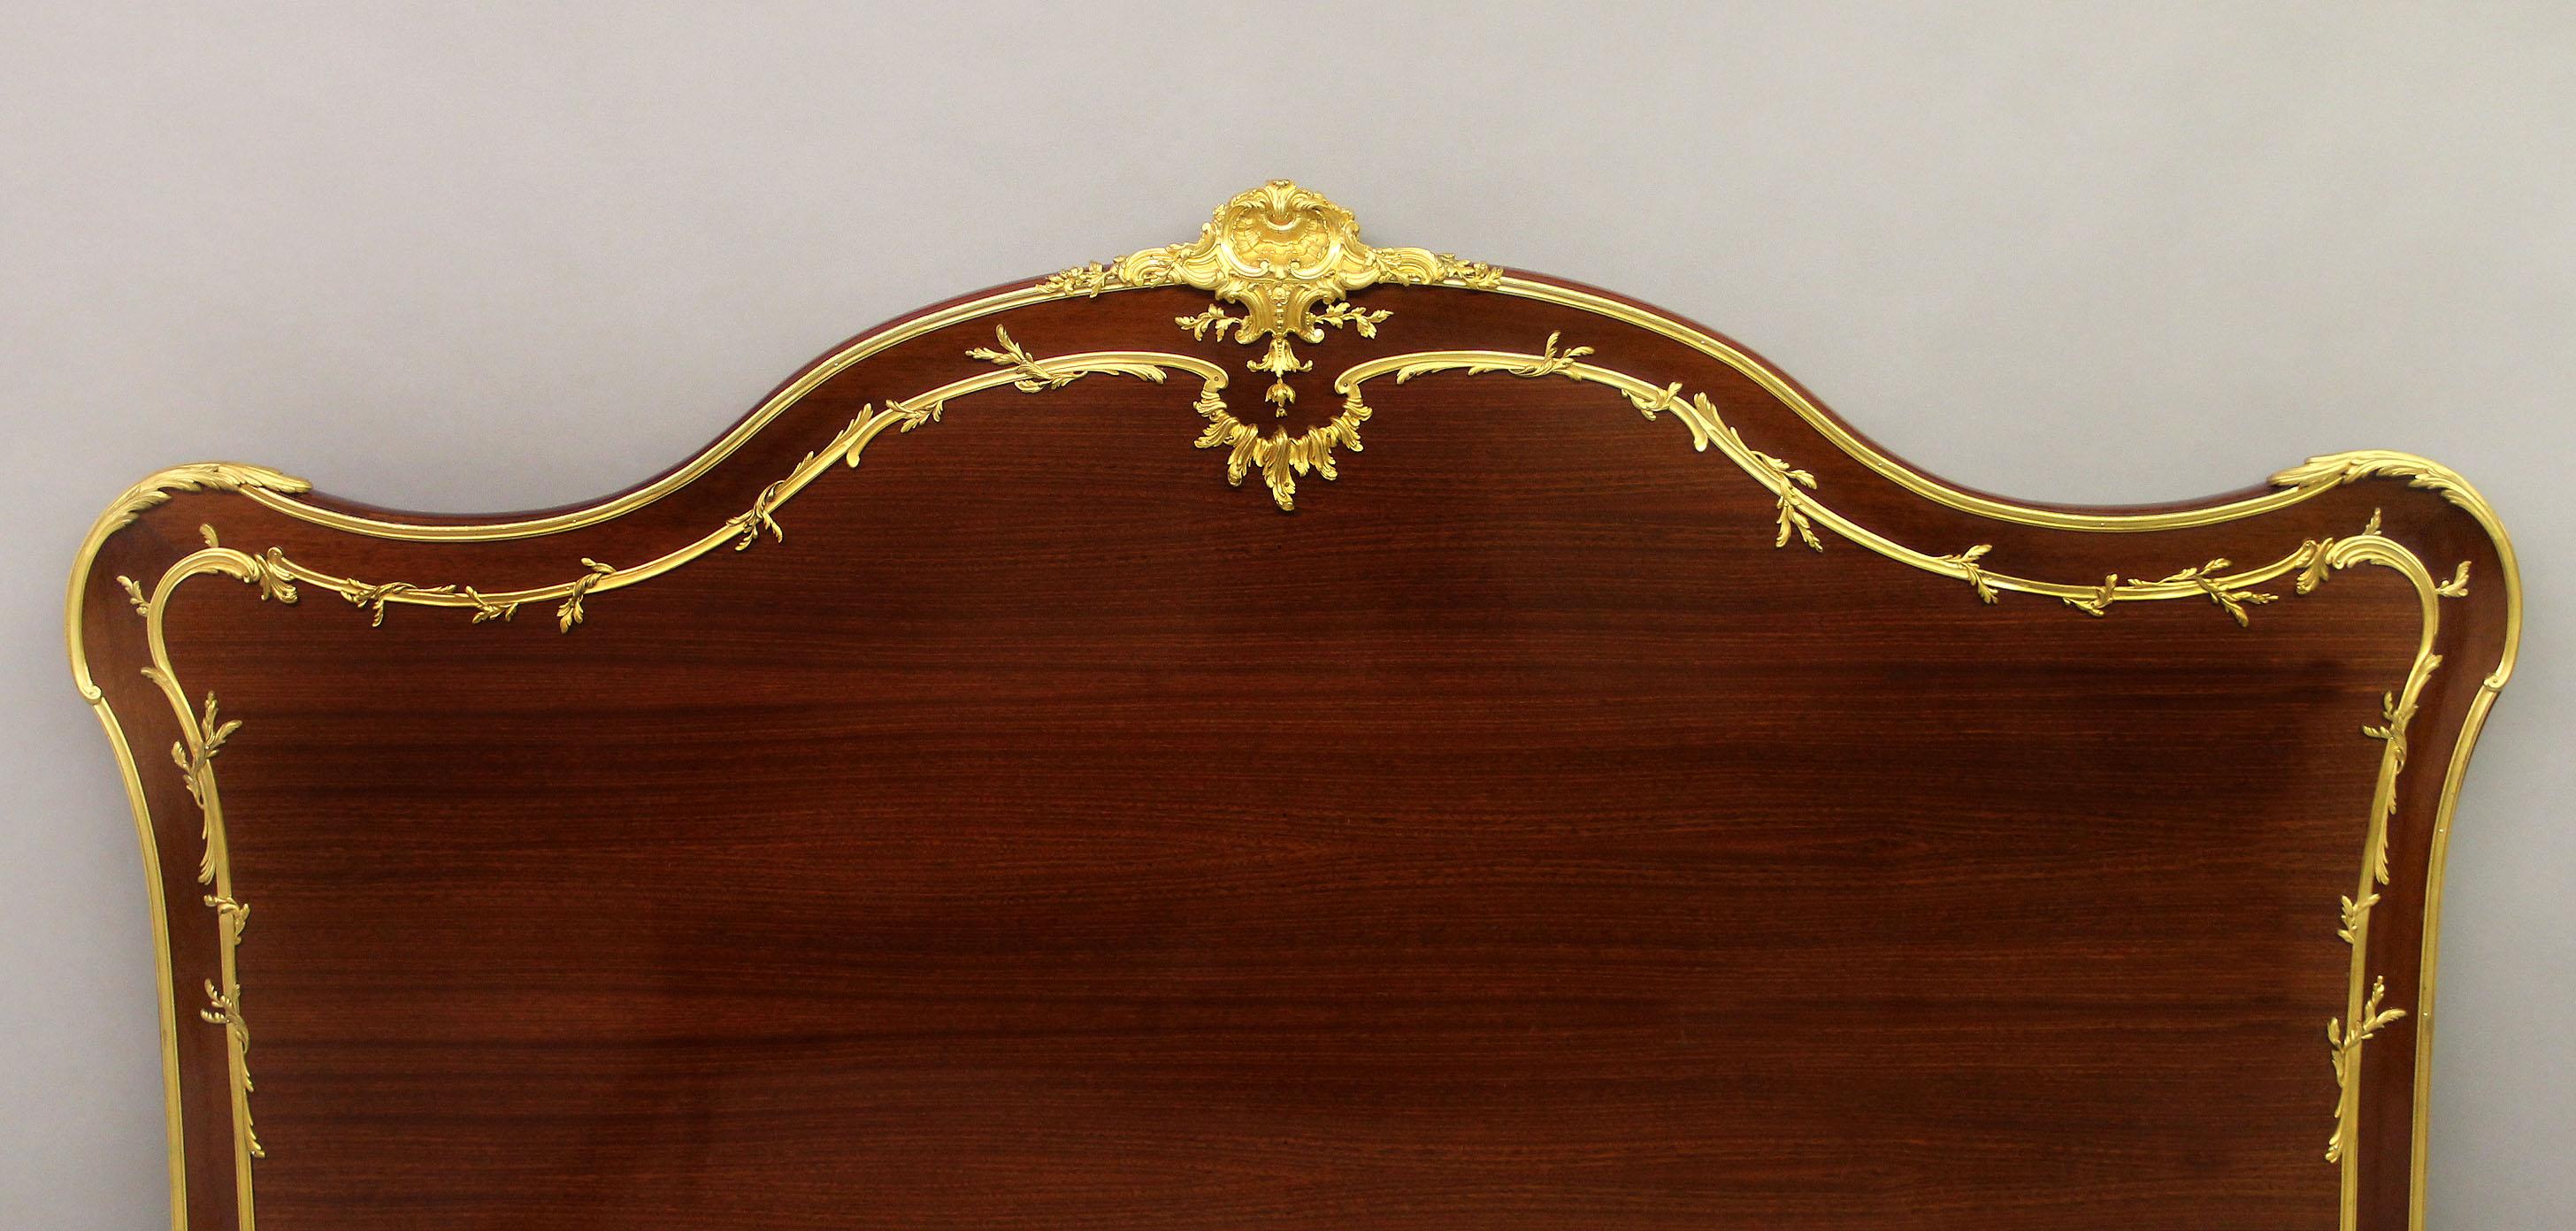 Belle Époque Early 20th Century Gilt Bronze-Mounted Mahogany King Size Bed by François Linke For Sale